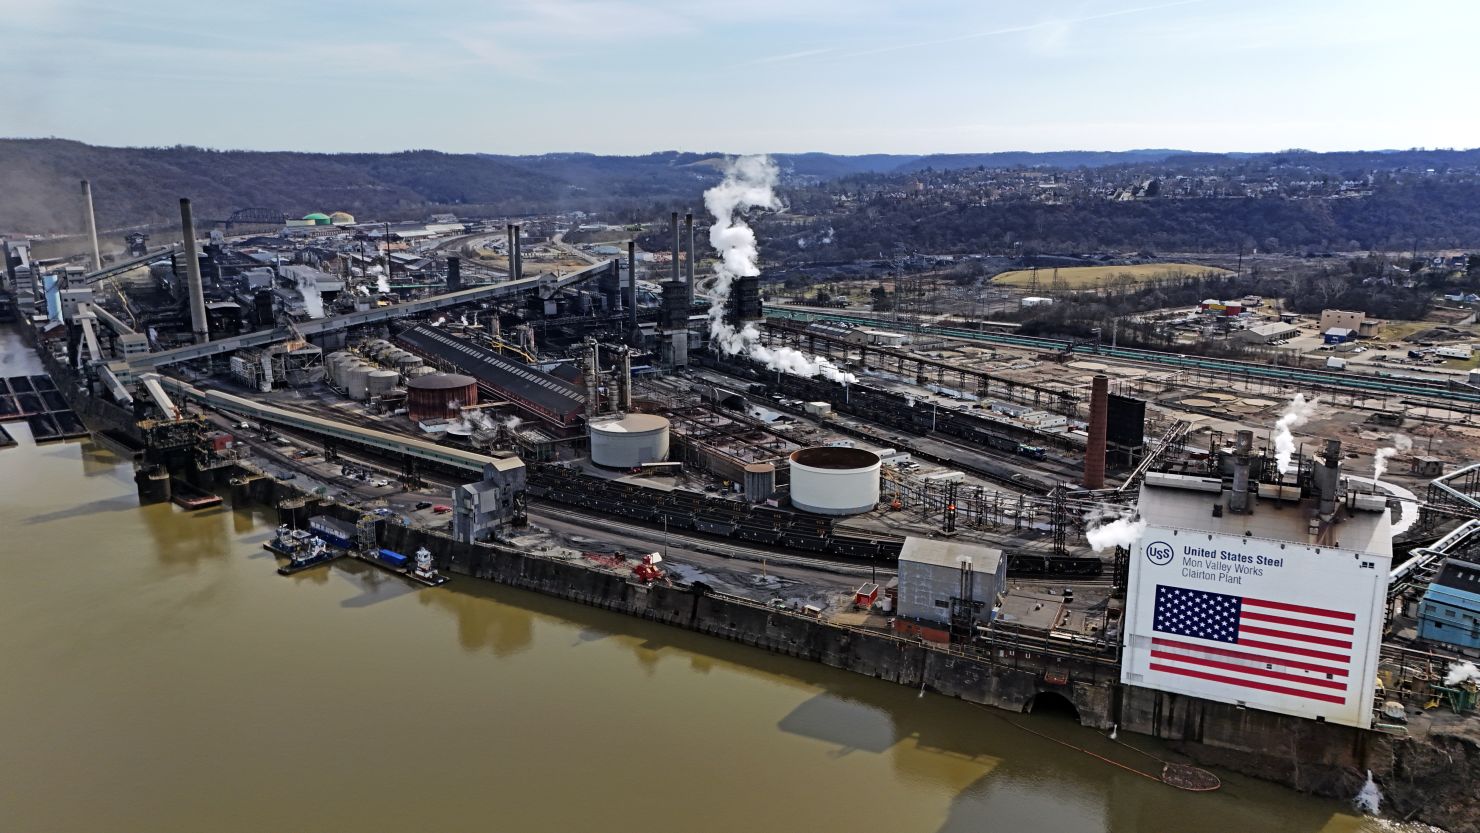 United States Steel Mon Valley Works Clairton Plant in Pennsylvania, on February 26, 2024.